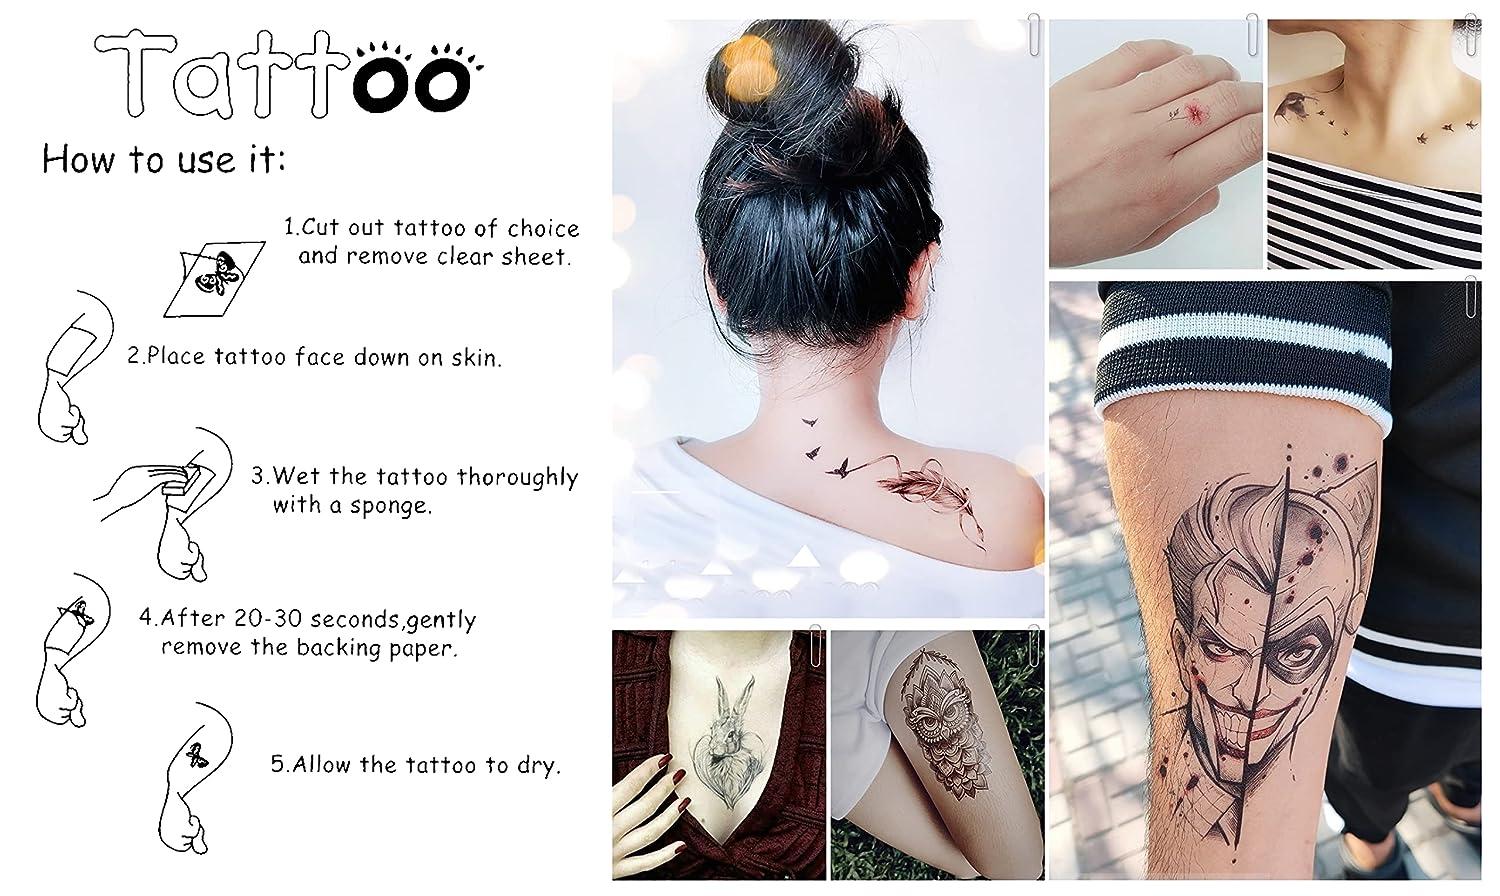 These Are the Best Places to Have Your First Tattoo